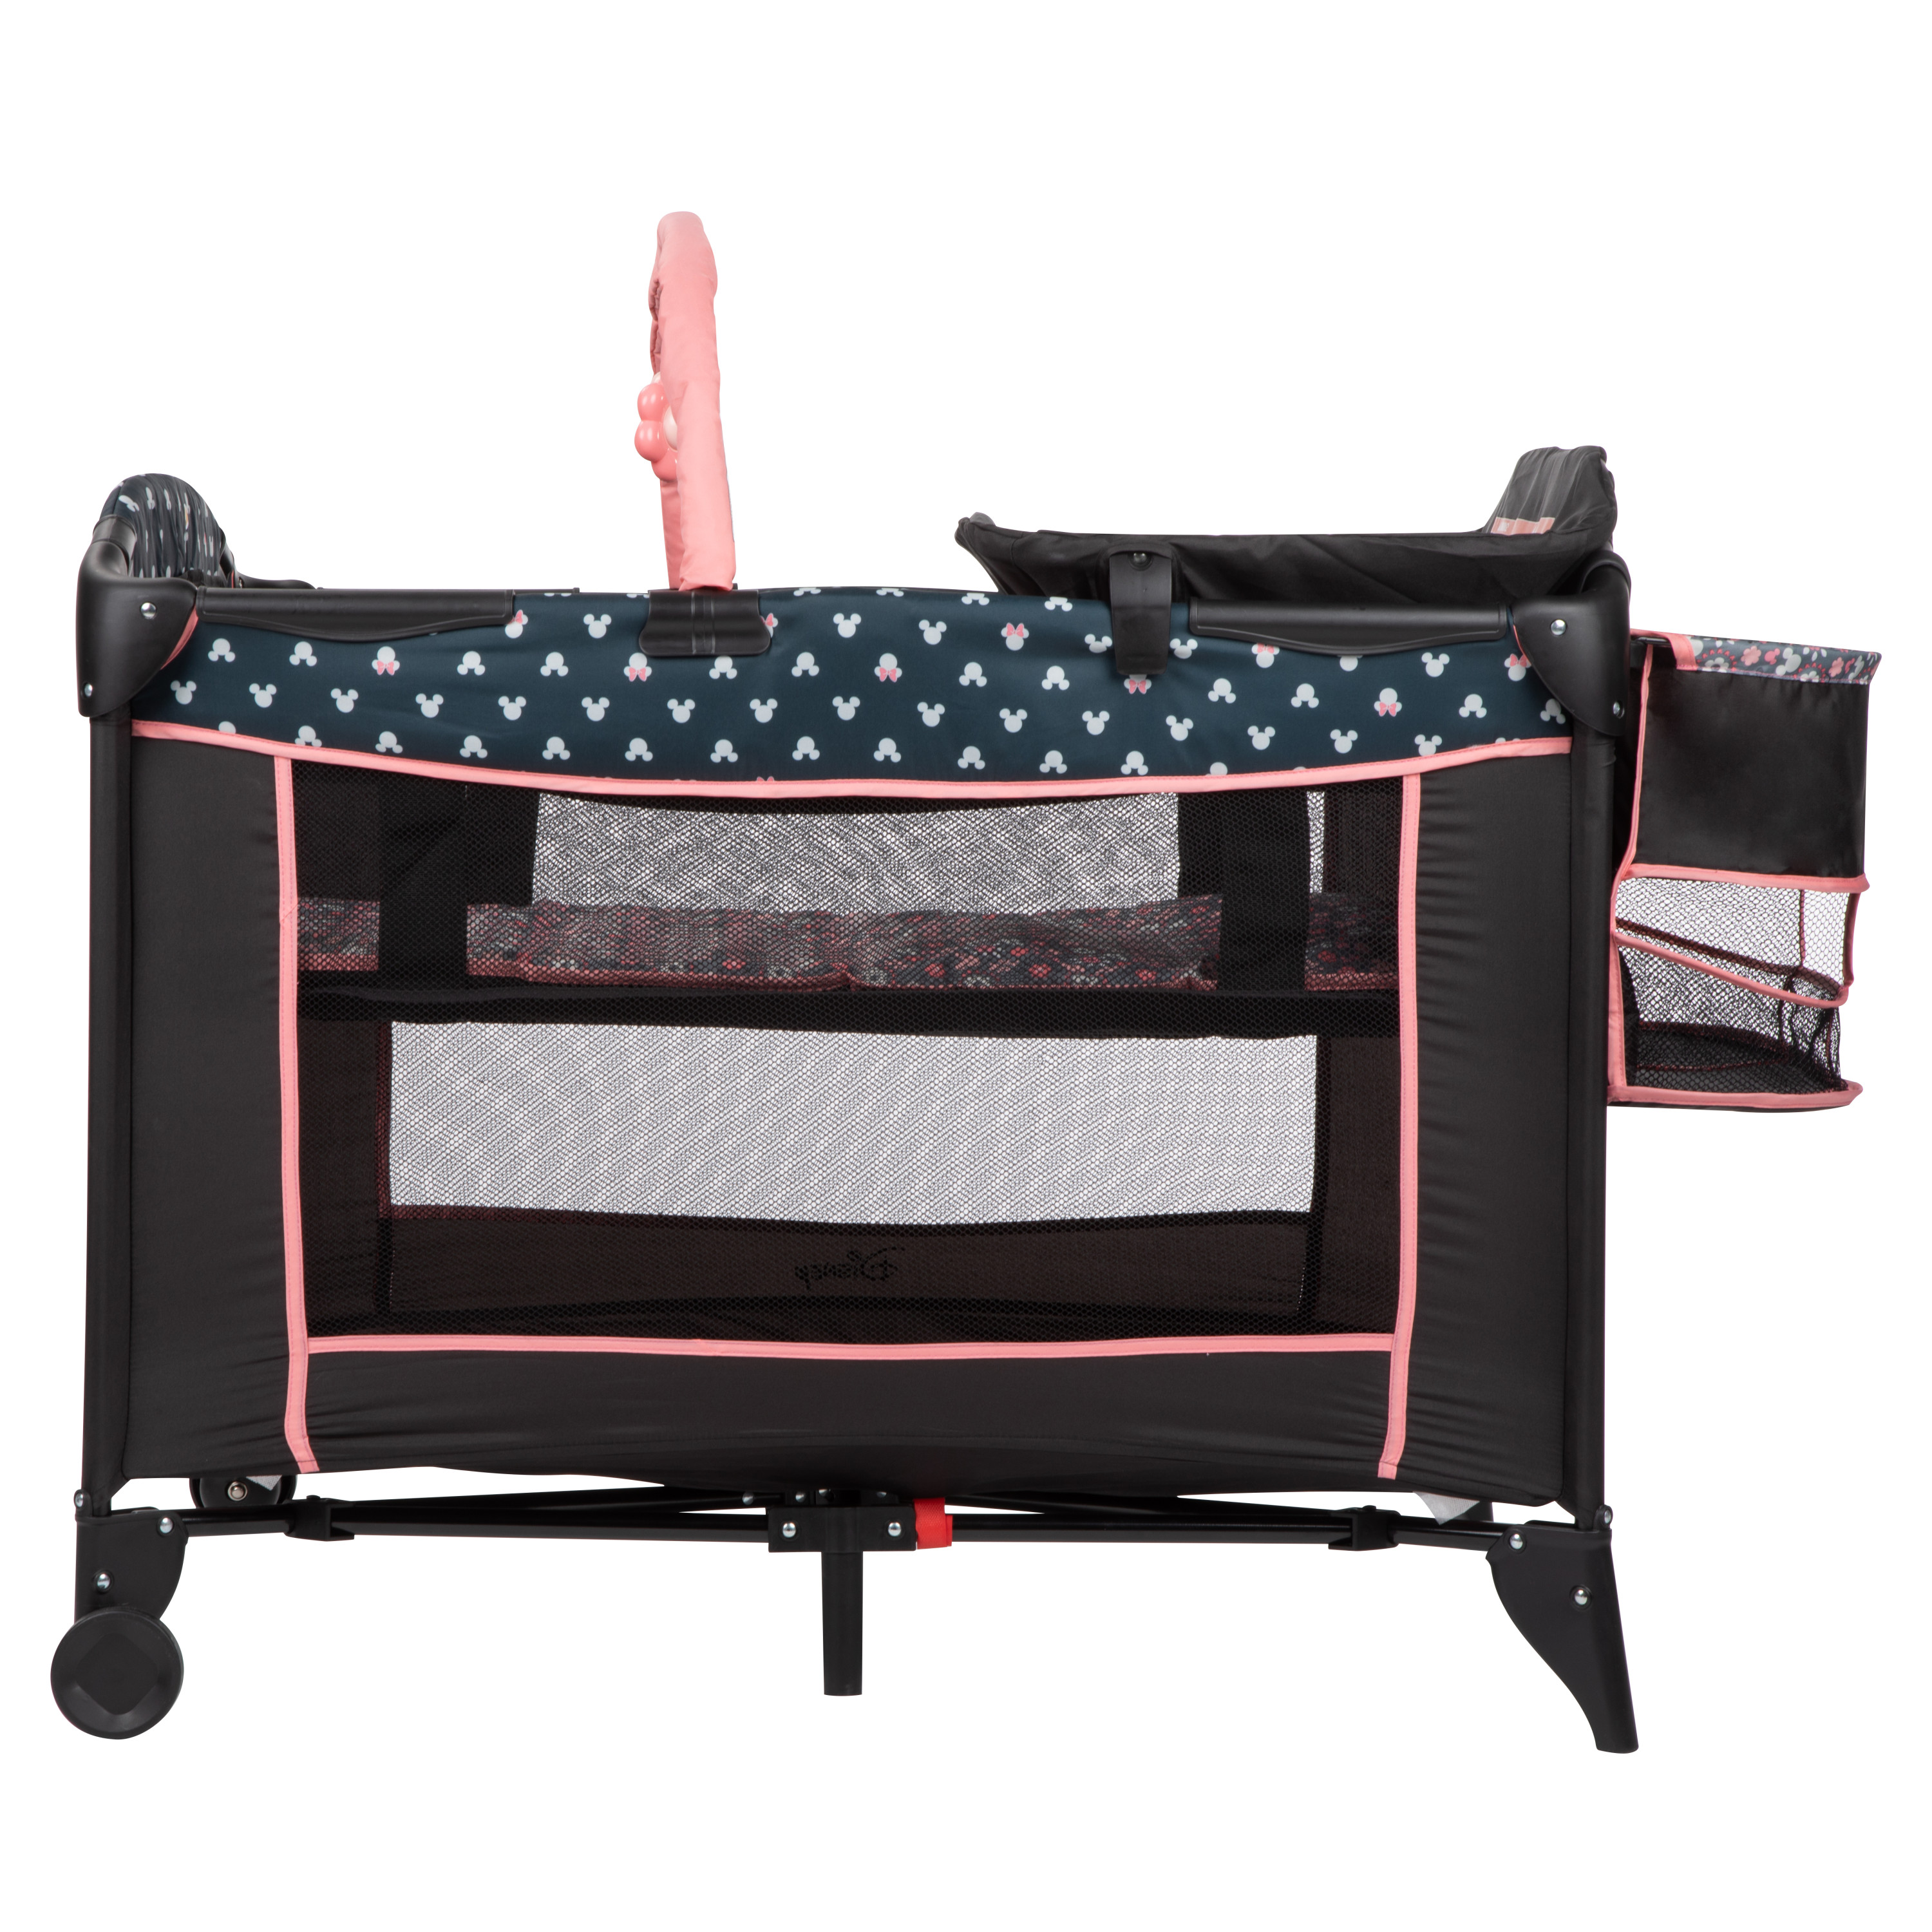 Disney Baby Sweet Wonder Baby Play Yard with Bassinet and Toy Bar, Minnie Varsity - image 4 of 12